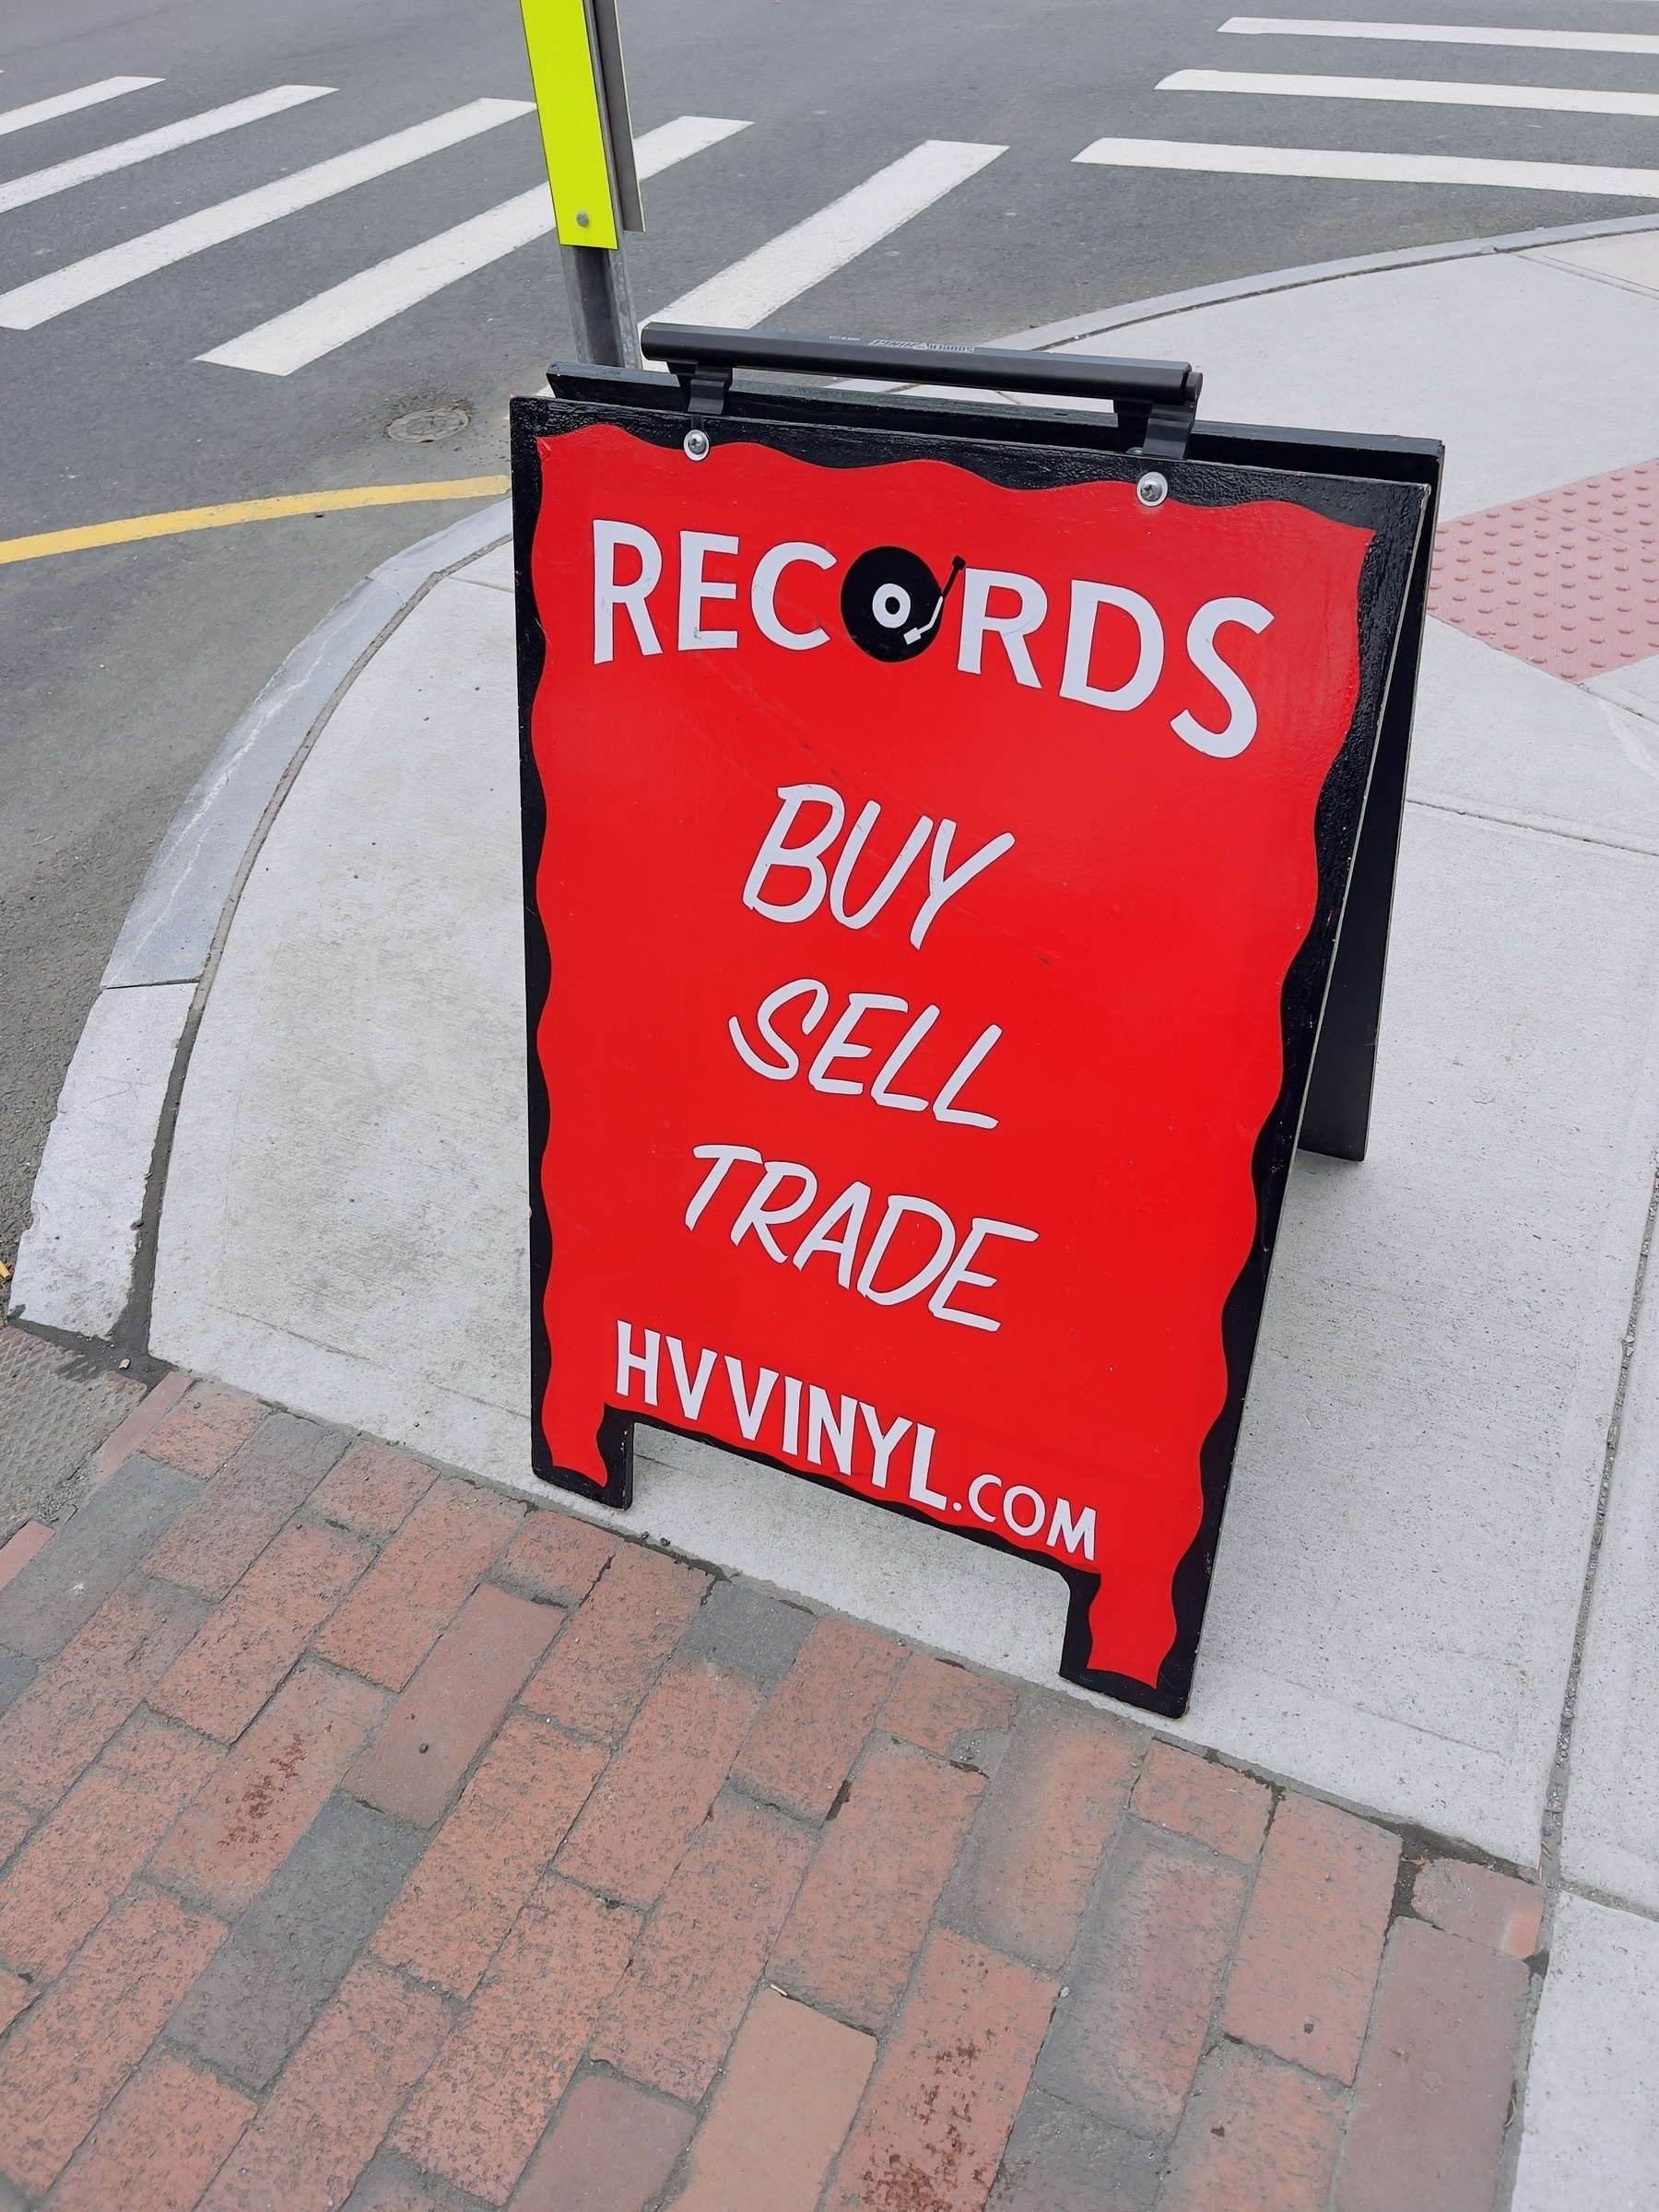 Sandwich board outside local vinyl records store saying “Records, by, sell, trade, hvvinyl.com”